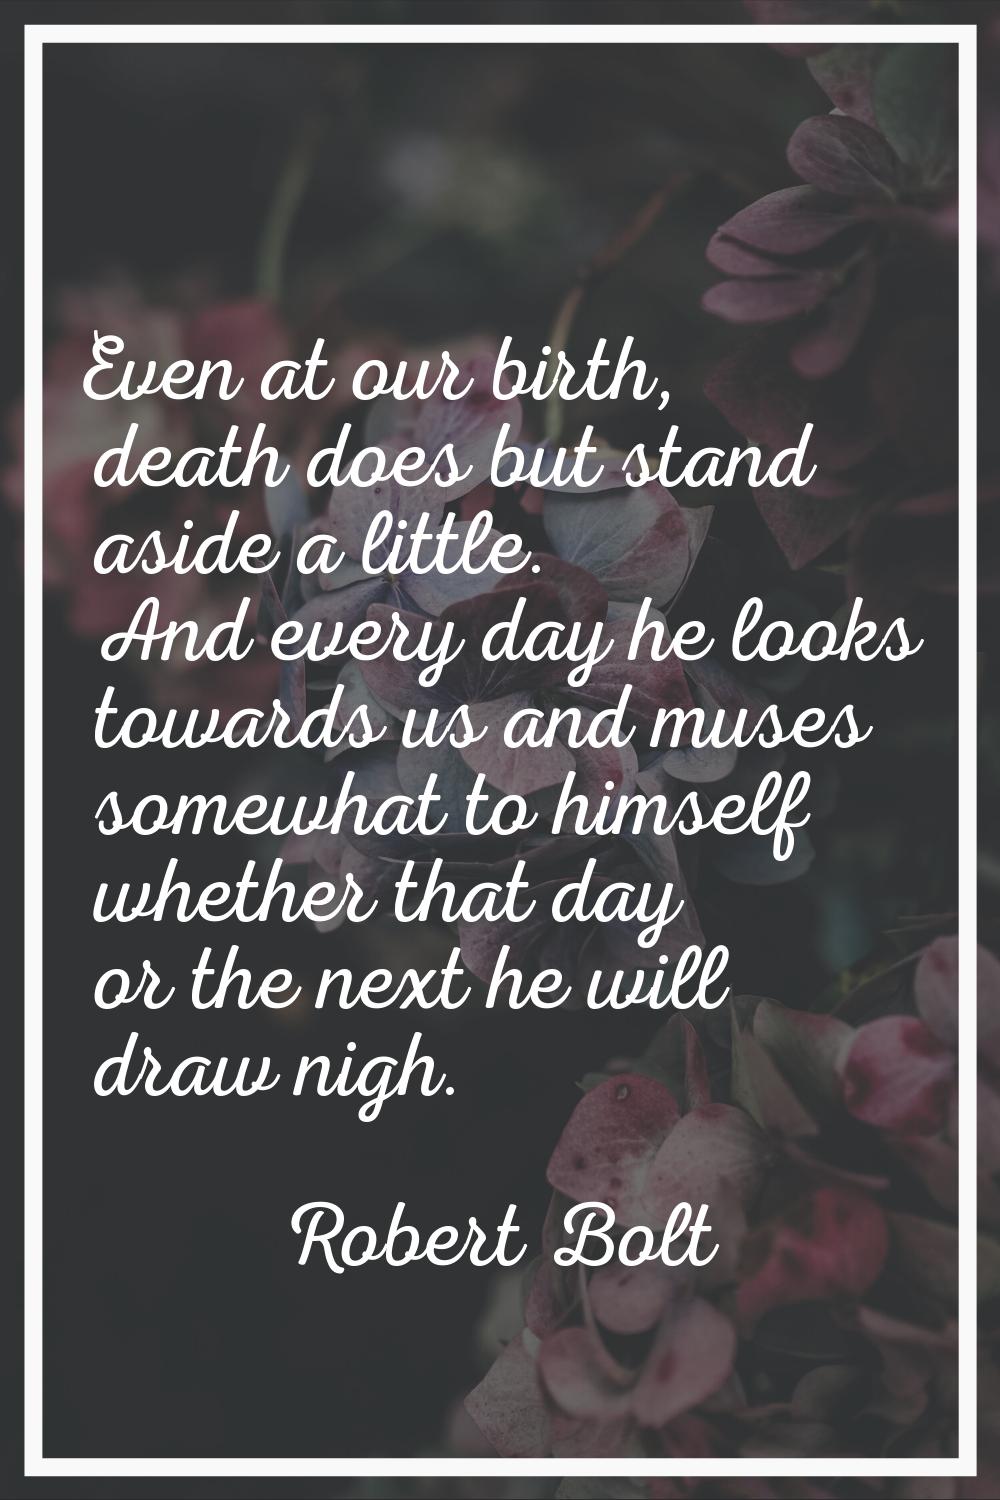 Even at our birth, death does but stand aside a little. And every day he looks towards us and muses